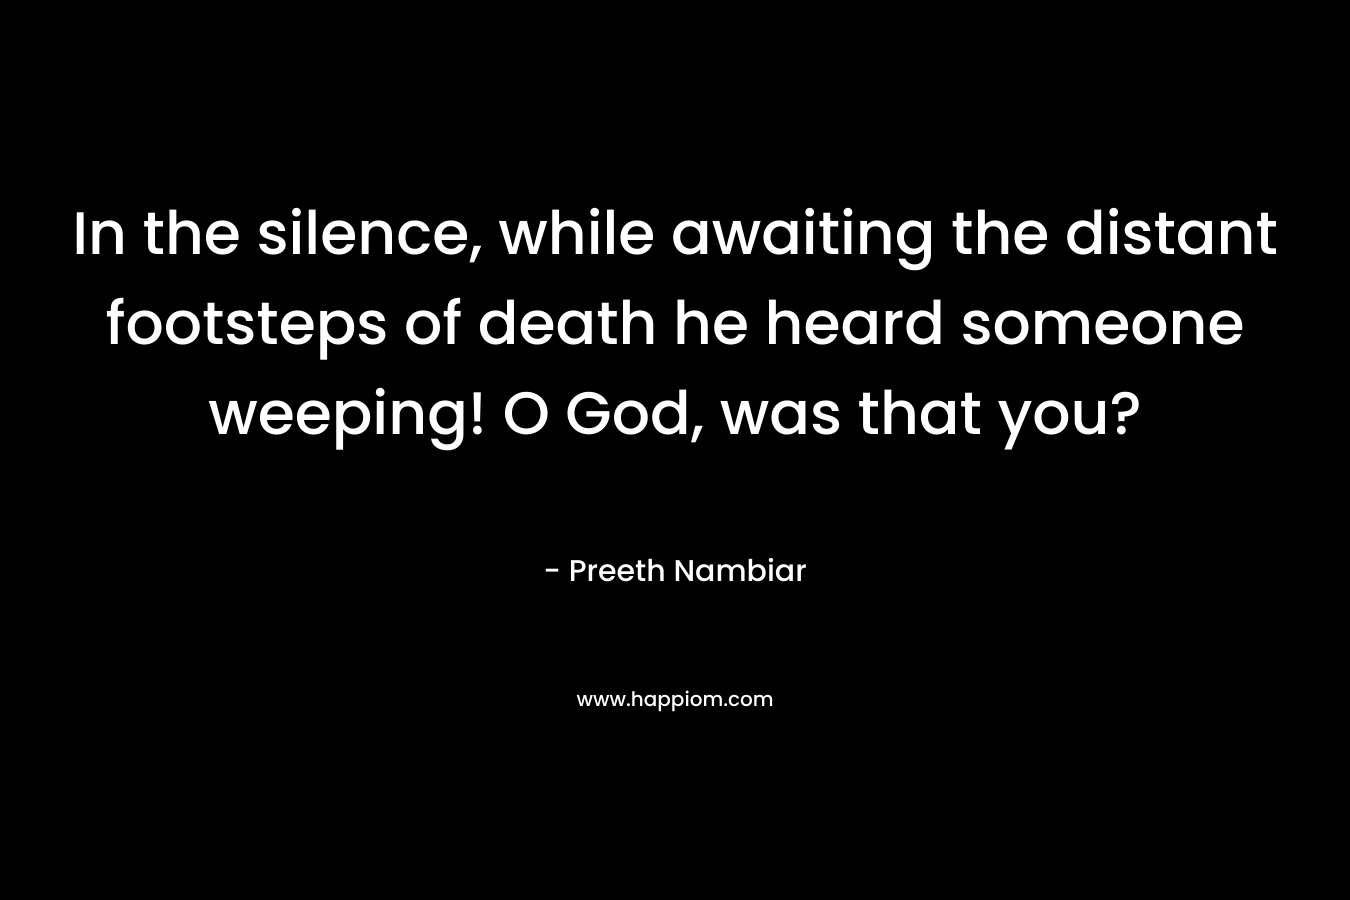 In the silence, while awaiting the distant footsteps of death he heard someone weeping! O God, was that you?